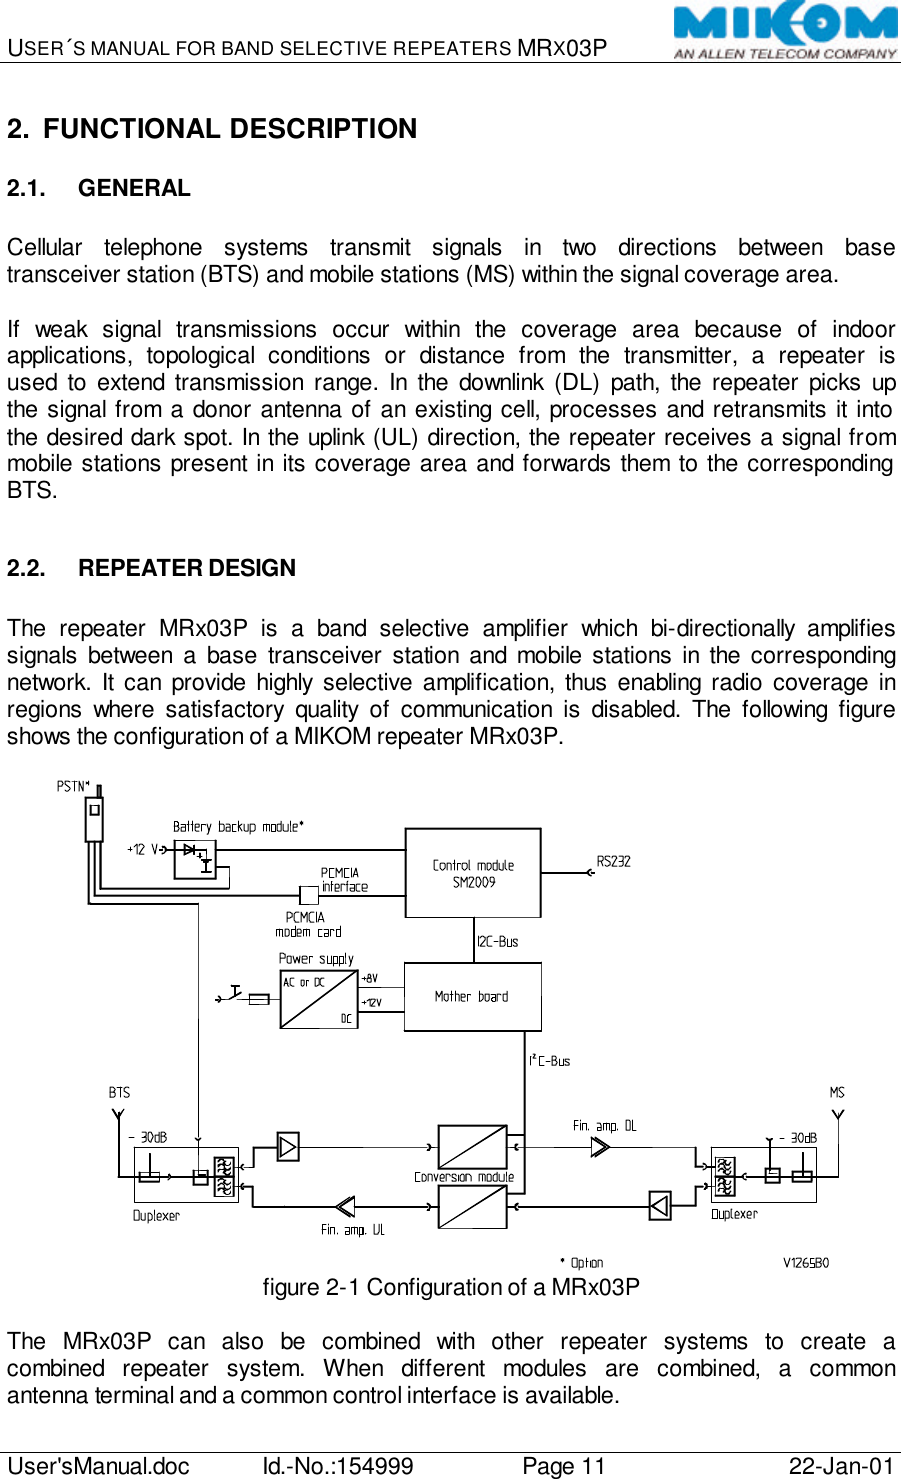 USER´S MANUAL FOR BAND SELECTIVE REPEATERS MRX03P   User&apos;sManual.doc Id.-No.:154999 Page 11 22-Jan-01  2. FUNCTIONAL DESCRIPTION 2.1. GENERAL  Cellular telephone systems transmit signals in two directions between base transceiver station (BTS) and mobile stations (MS) within the signal coverage area.  If weak signal transmissions occur within the coverage area because of indoor applications, topological conditions or distance from the transmitter, a repeater is used to extend transmission range. In the downlink (DL) path, the repeater picks up the signal from a donor antenna of an existing cell, processes and retransmits it into the desired dark spot. In the uplink (UL) direction, the repeater receives a signal from mobile stations present in its coverage area and forwards them to the corresponding BTS.  2.2. REPEATER DESIGN  The repeater MRx03P is a band selective amplifier which bi-directionally amplifies signals between a base transceiver station and mobile stations in the corresponding network. It can provide highly selective amplification, thus enabling radio coverage in regions where satisfactory quality of communication is disabled. The following figure shows the configuration of a MIKOM repeater MRx03P.   figure 2-1 Configuration of a MRx03P  The MRx03P can also be combined with other repeater systems to create a combined repeater system. When different modules are combined, a common antenna terminal and a common control interface is available. 